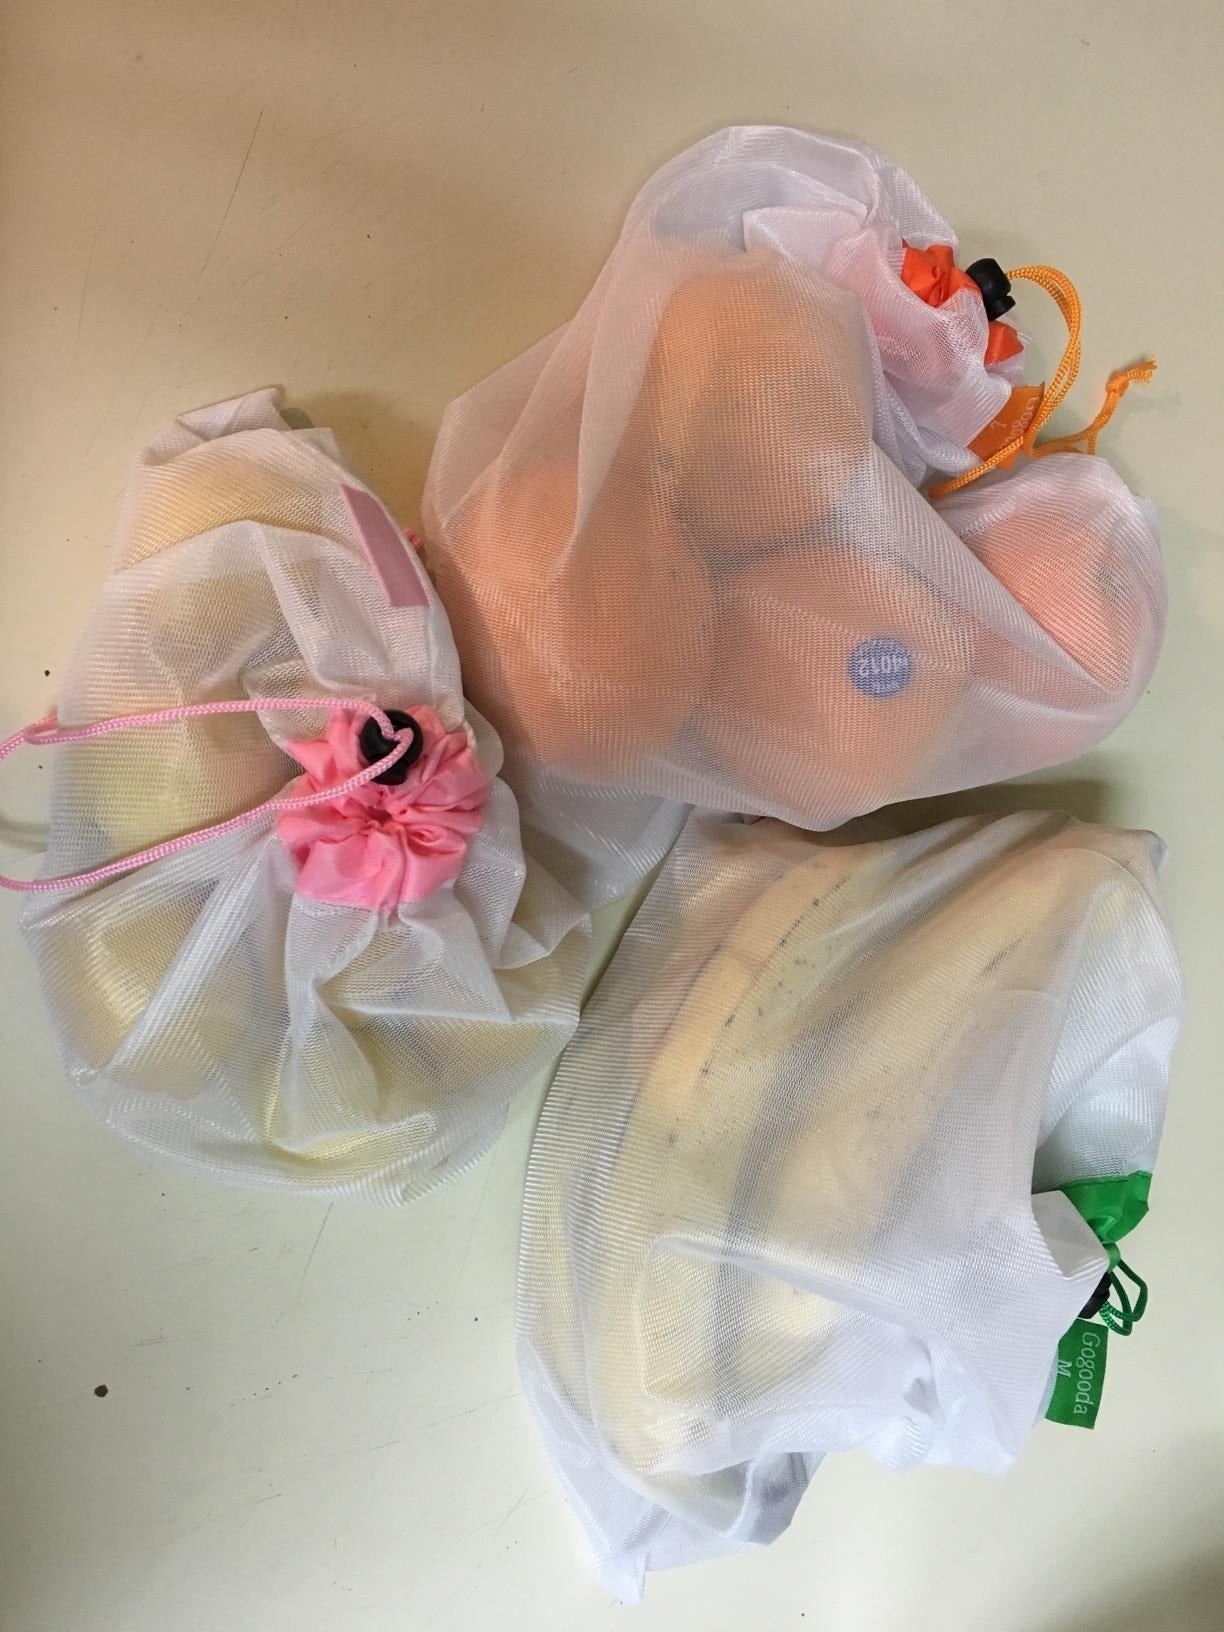 reviewer image of fruits divided into separate mesh produce bags